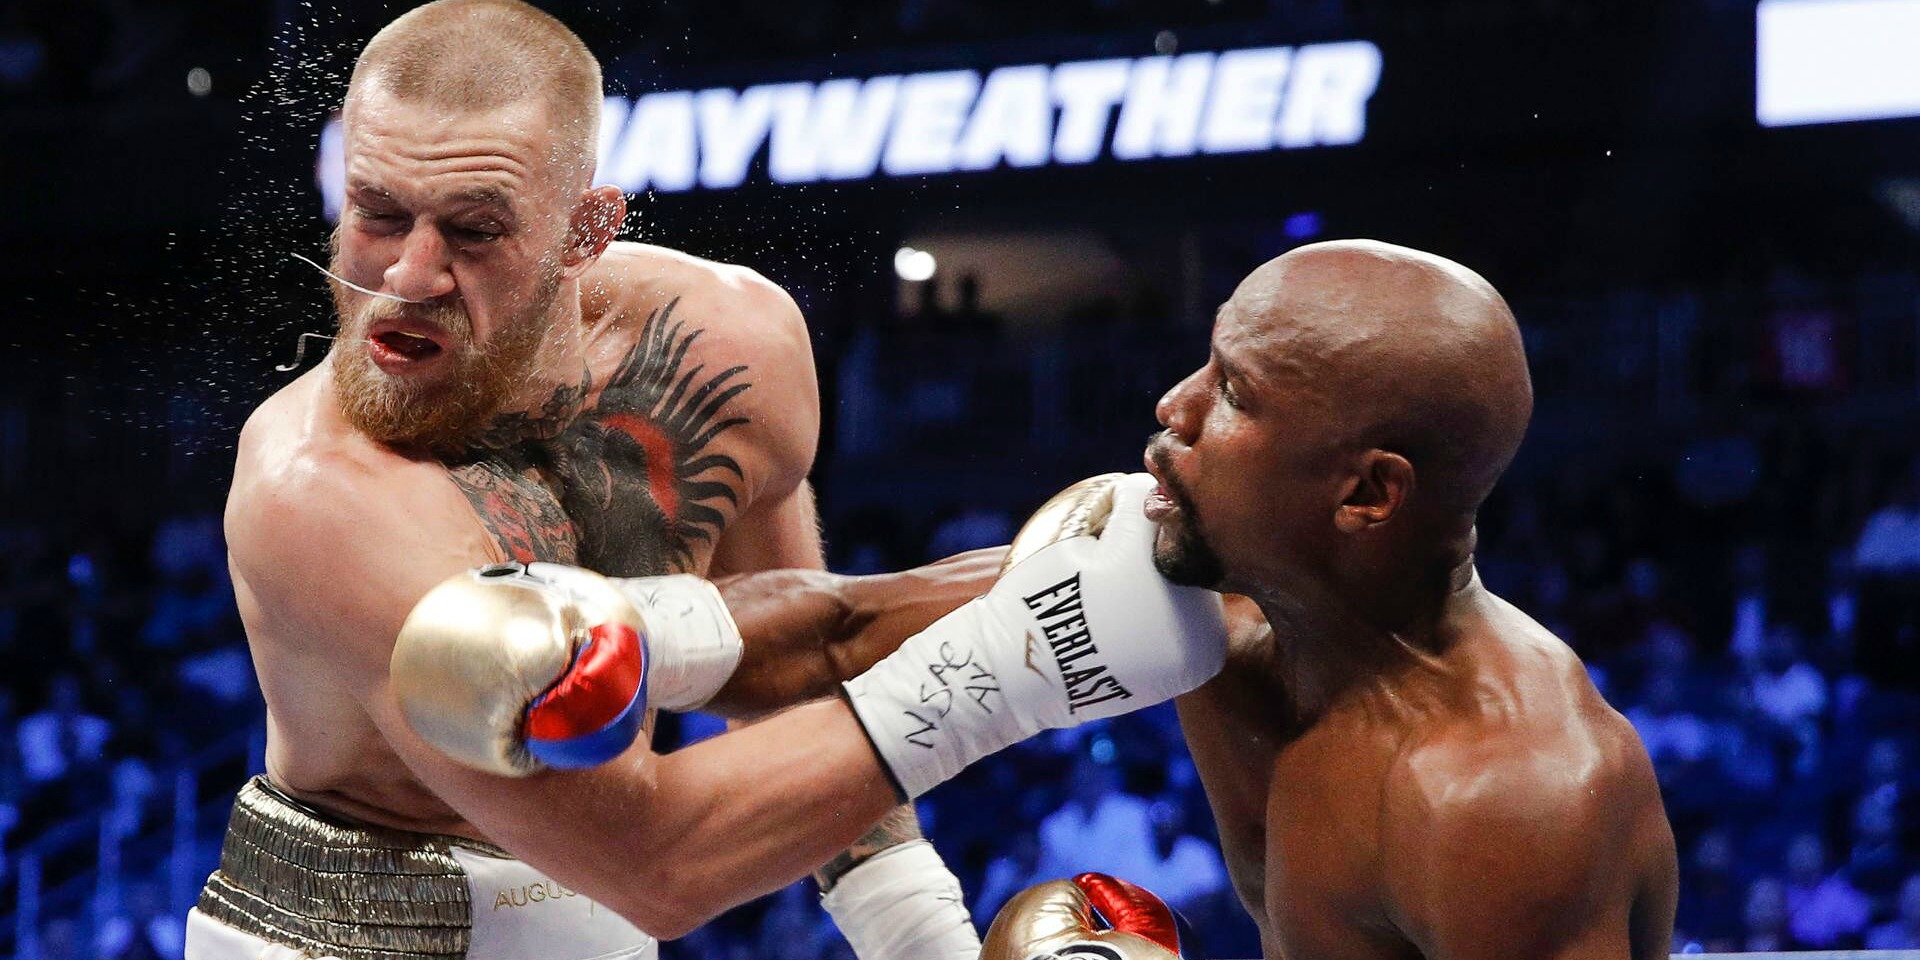 Memes Inspired by Floyd Mayweather Knocking the Shit Out of Conor McGregor1920 x 960